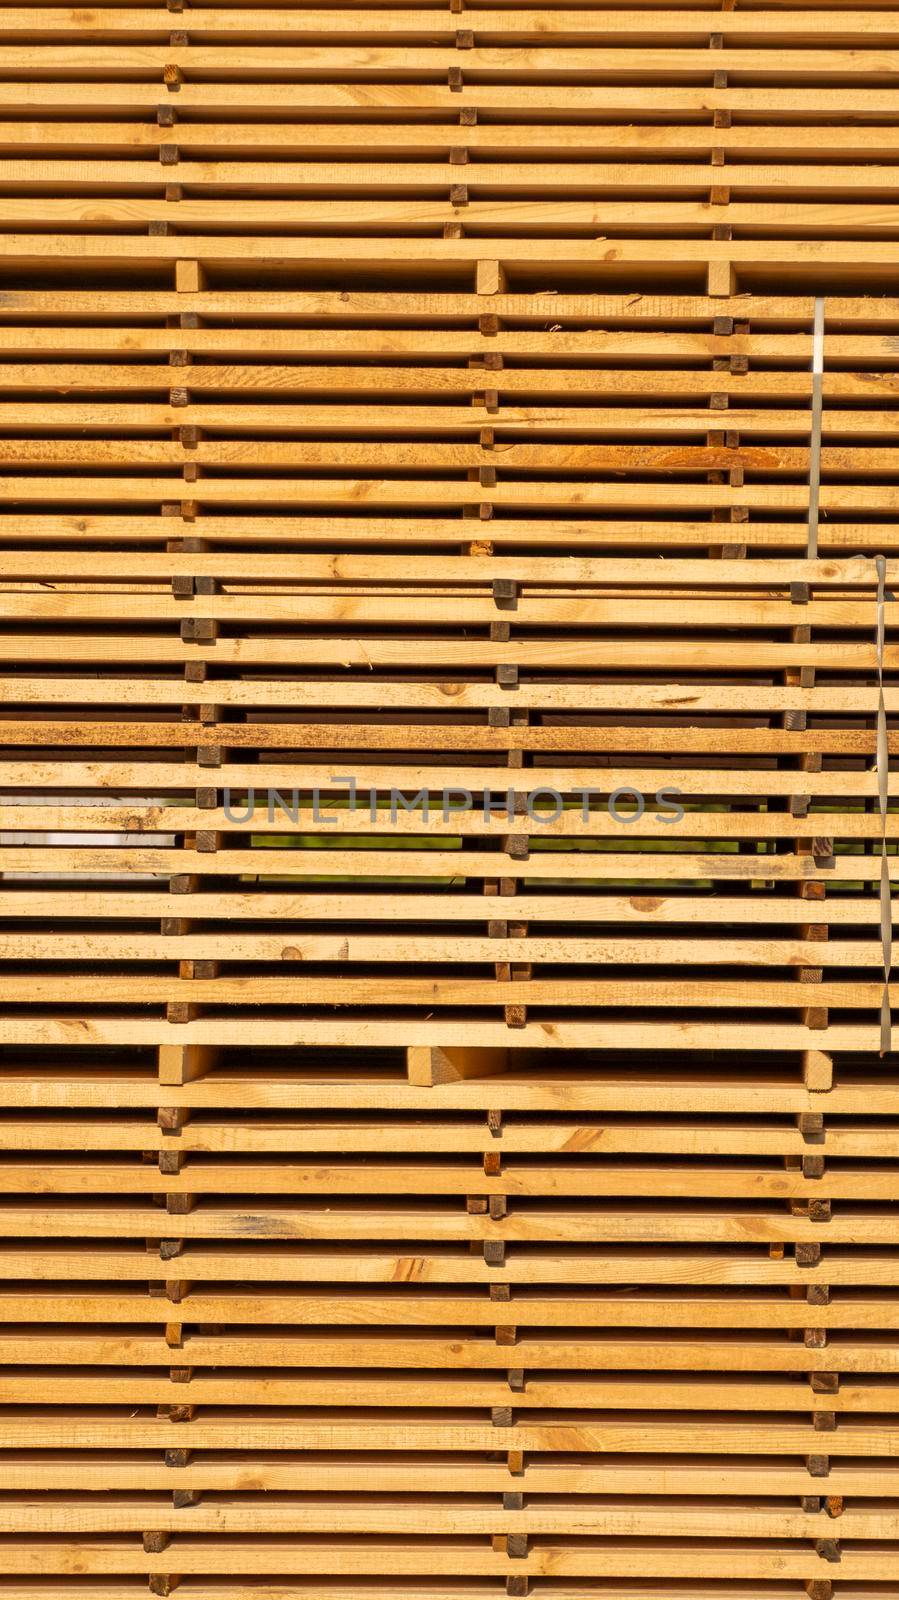 Storage of piles of wooden boards on the sawmill. Boards are stacked in a carpentry shop. Sawing drying and marketing of wood. Pine lumber for furniture production, construction. Lumber Industry. by vovsht